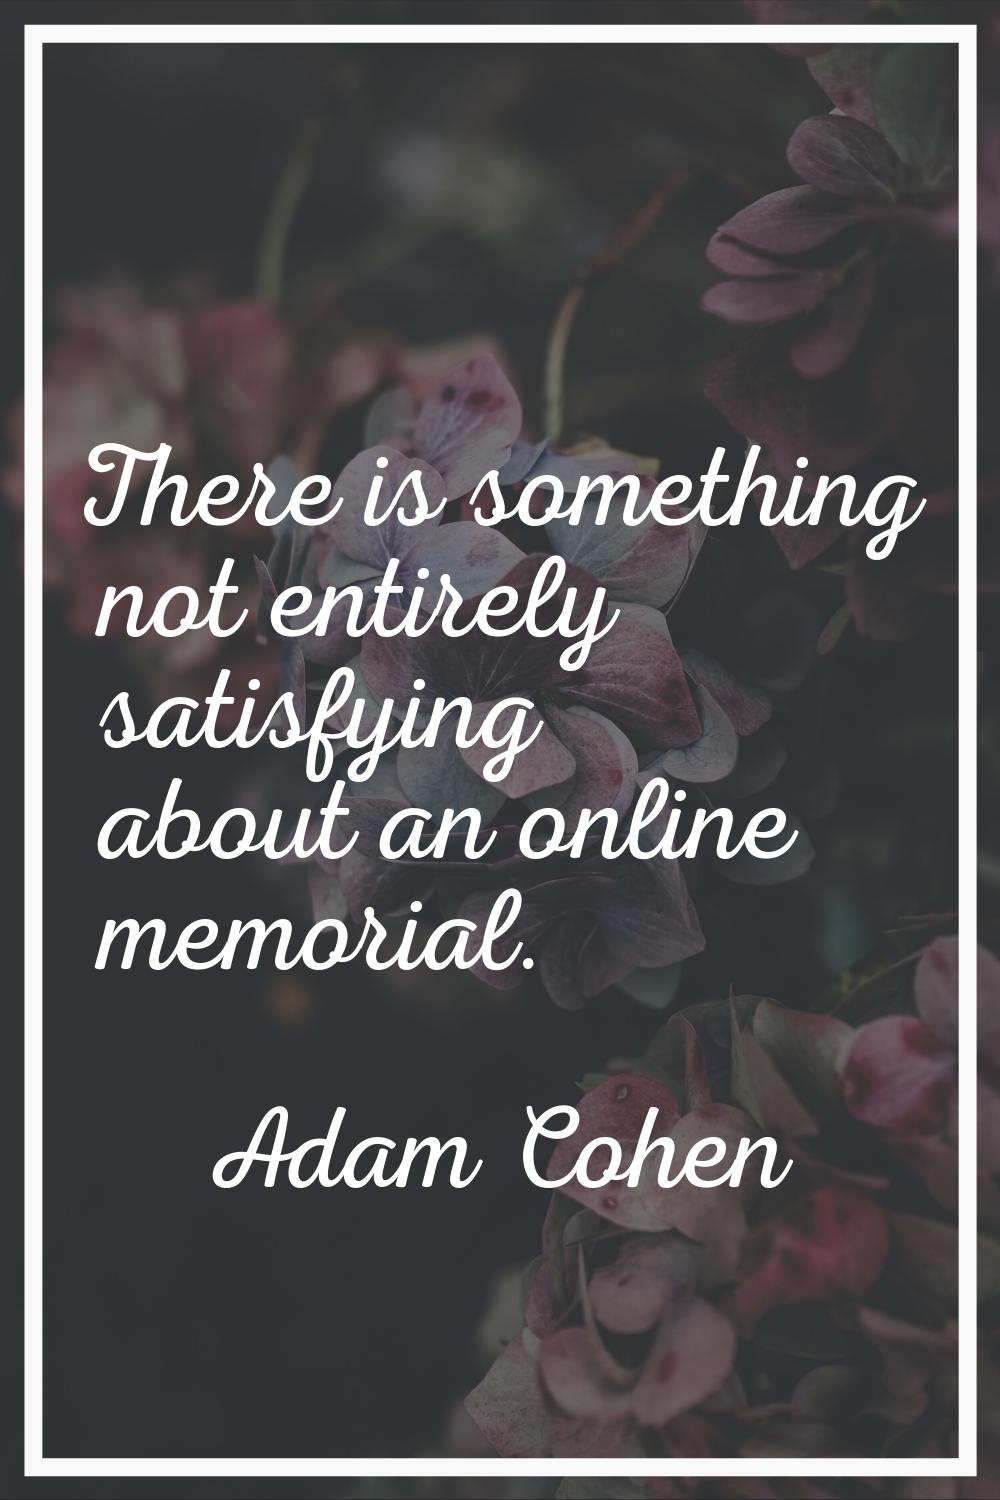 There is something not entirely satisfying about an online memorial.